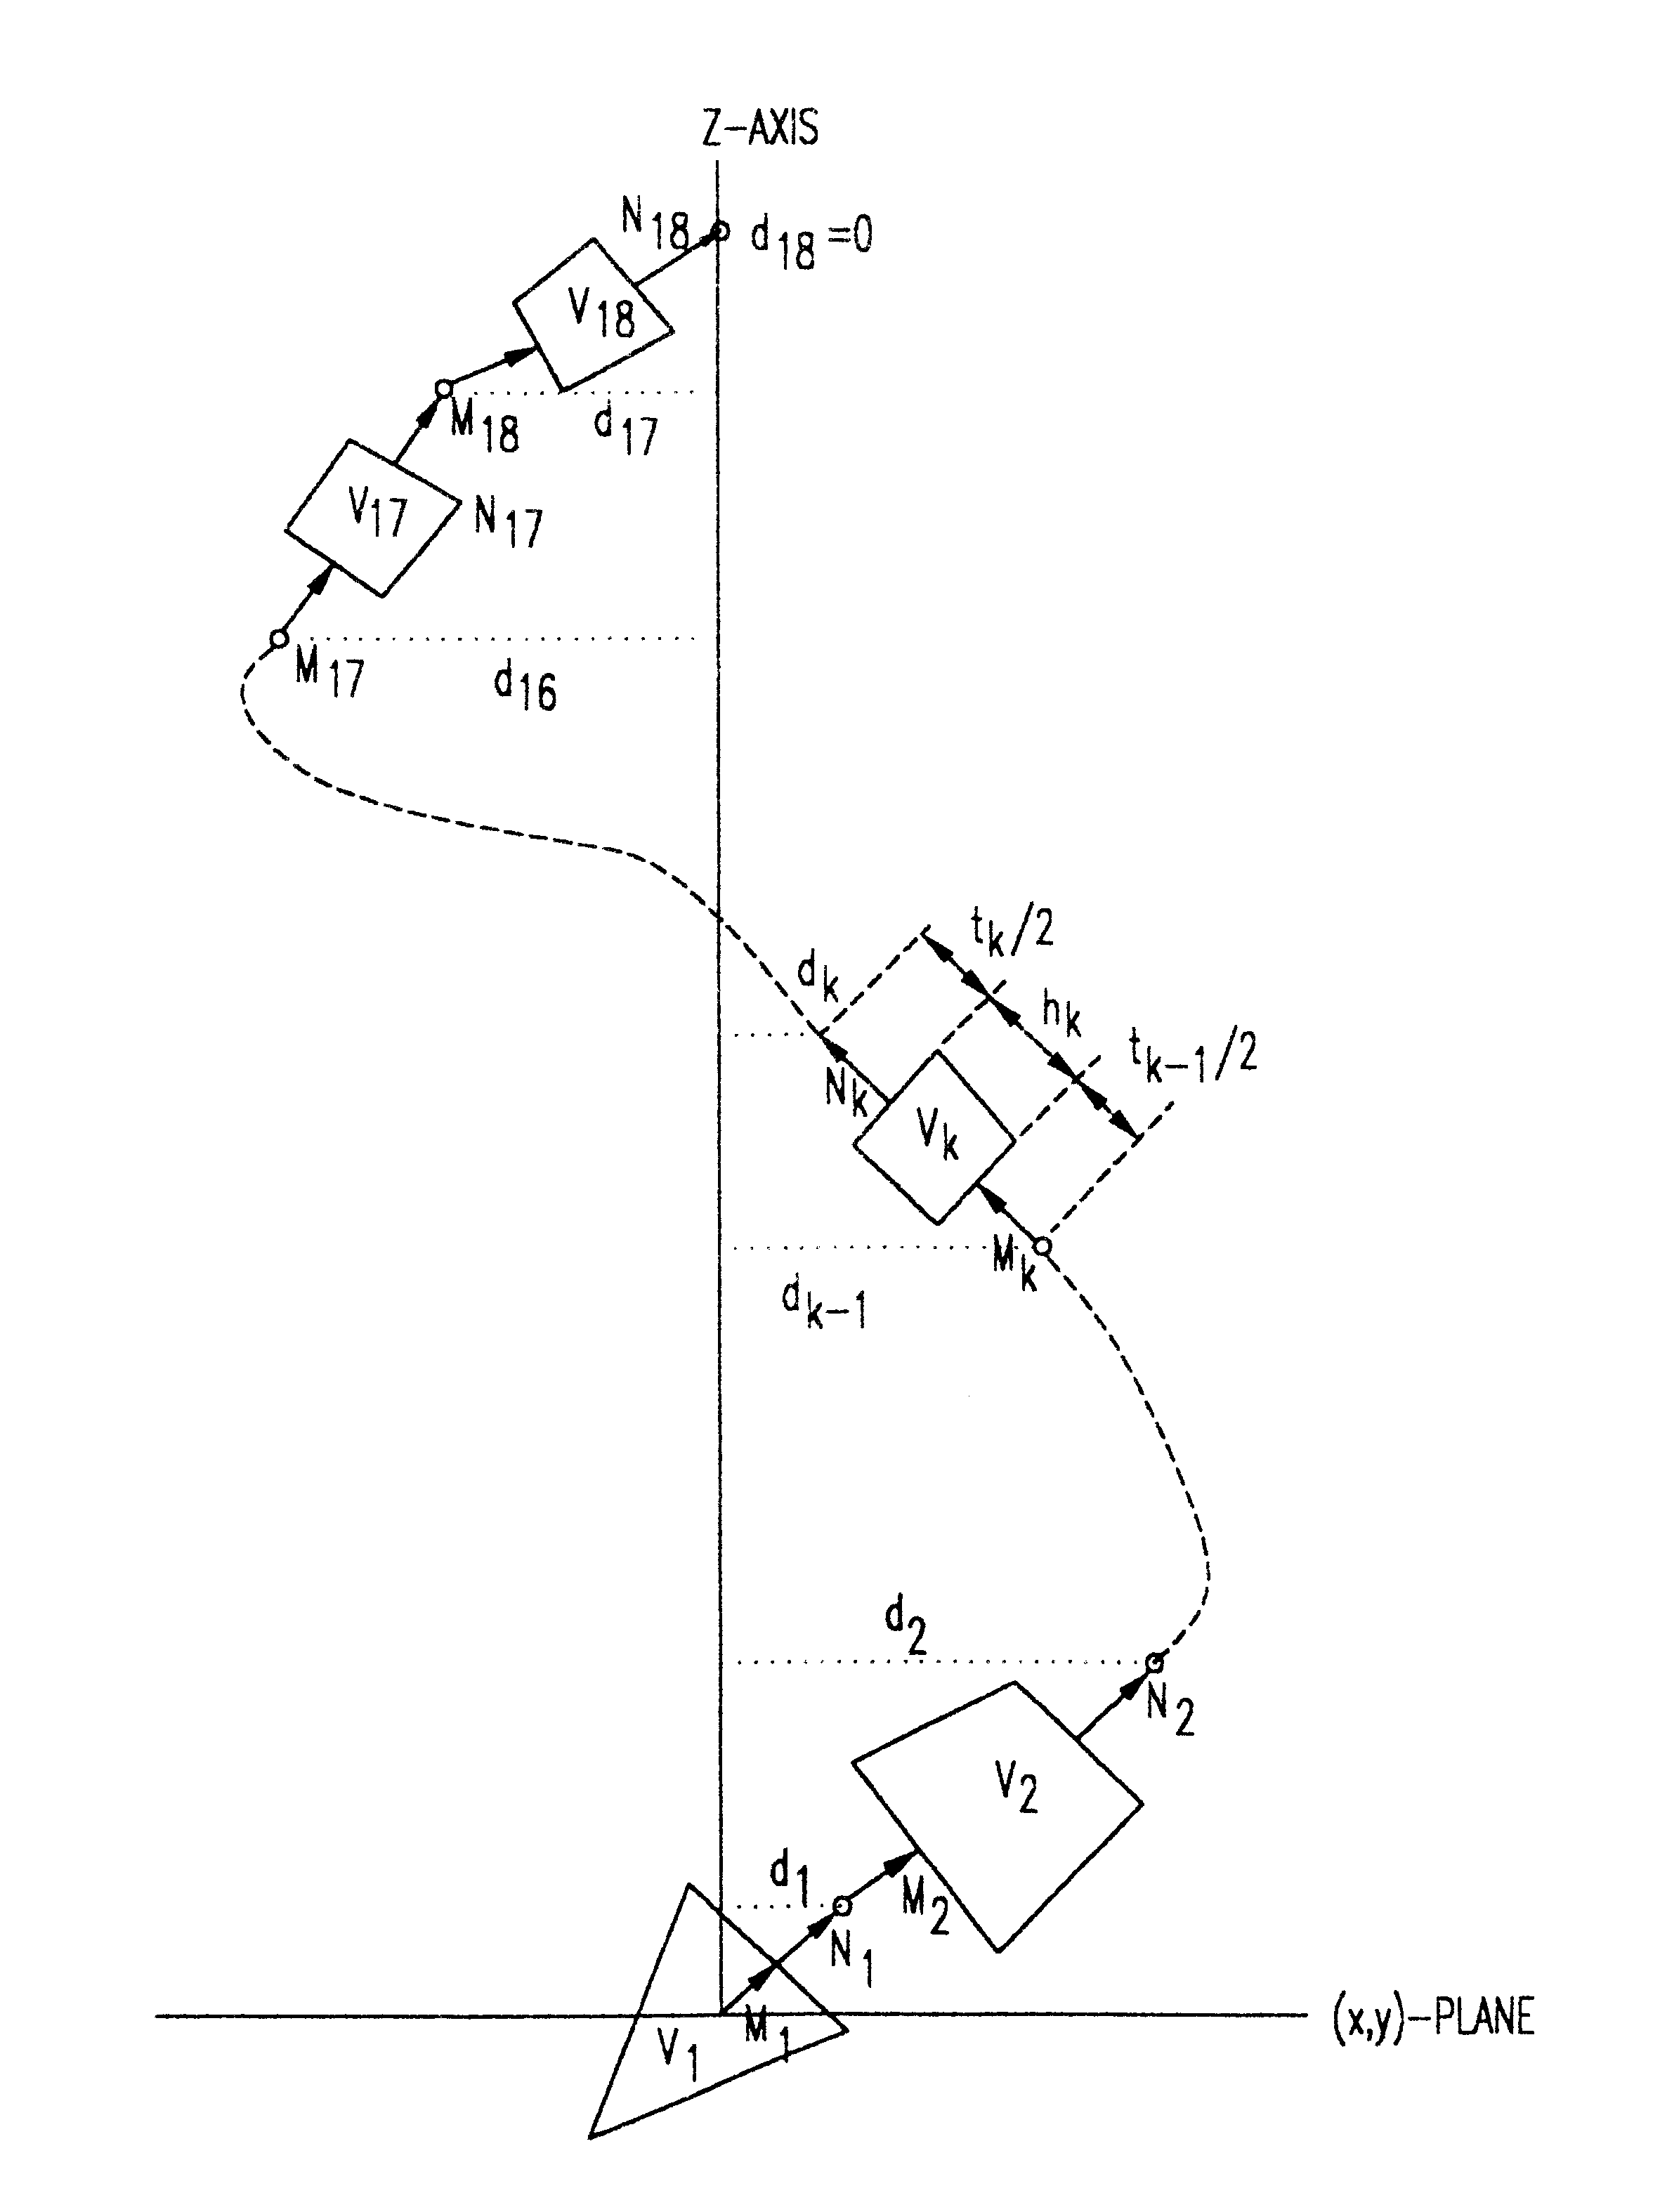 Computation of shapes of three-dimensional linkage structures based on optimization techniques